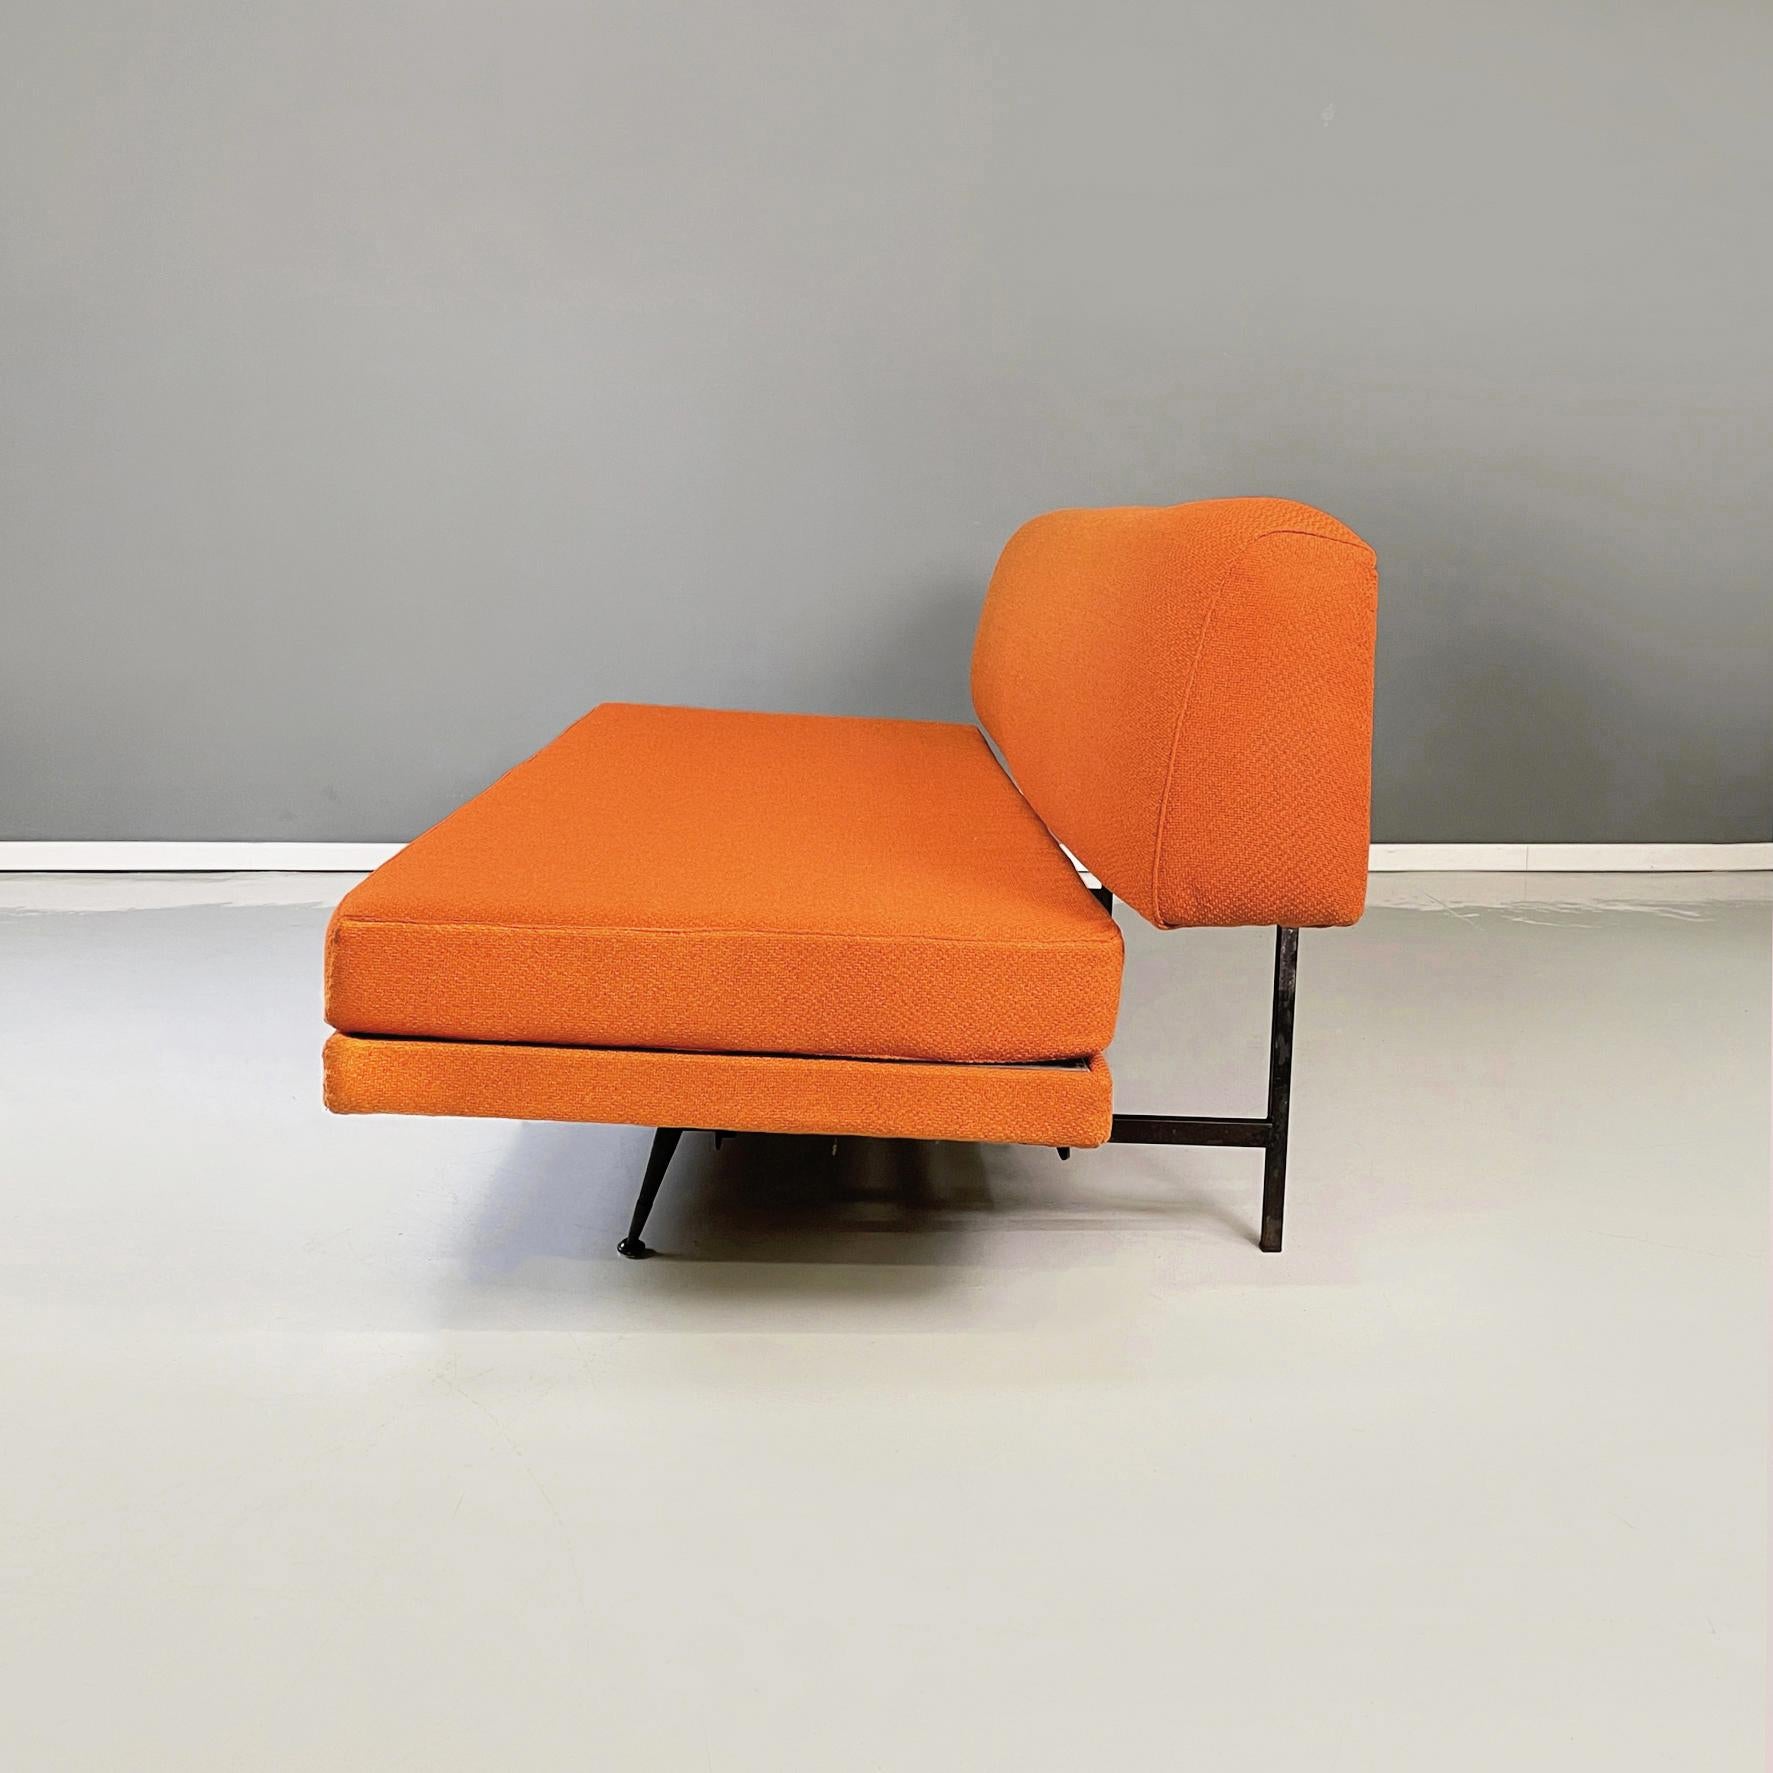 Italian Mid-Century Modern Sofa and Bed in orange Fabric and Black Metal, 1960s 3